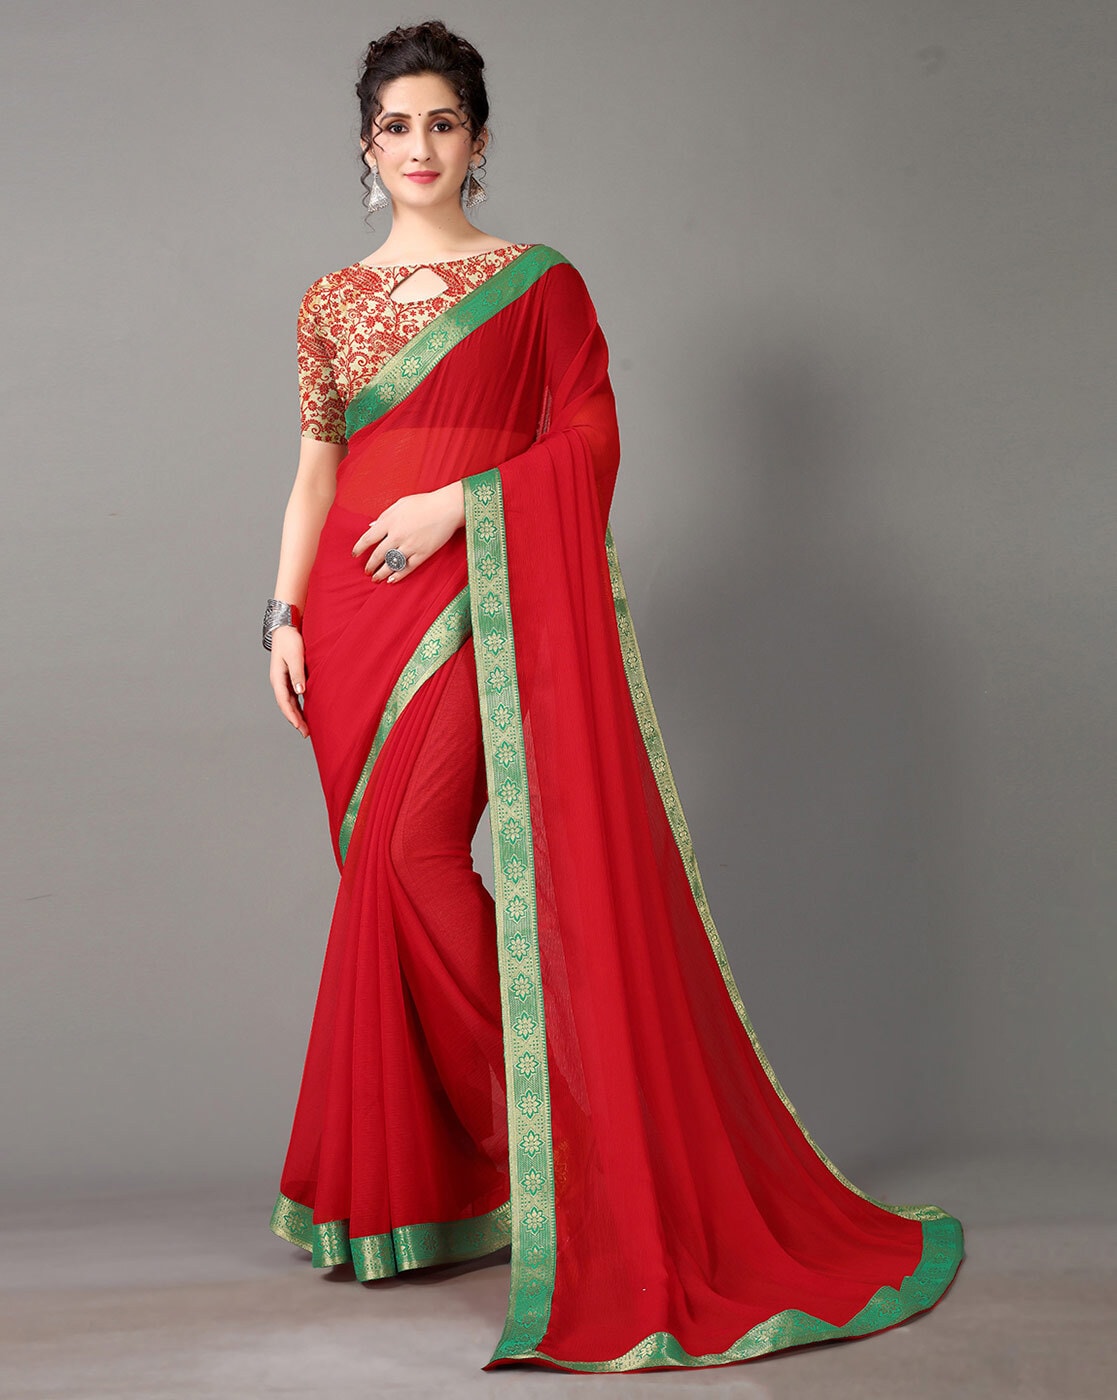 Buy Red Sarees Online At Best Prices And Offers From Top Brands